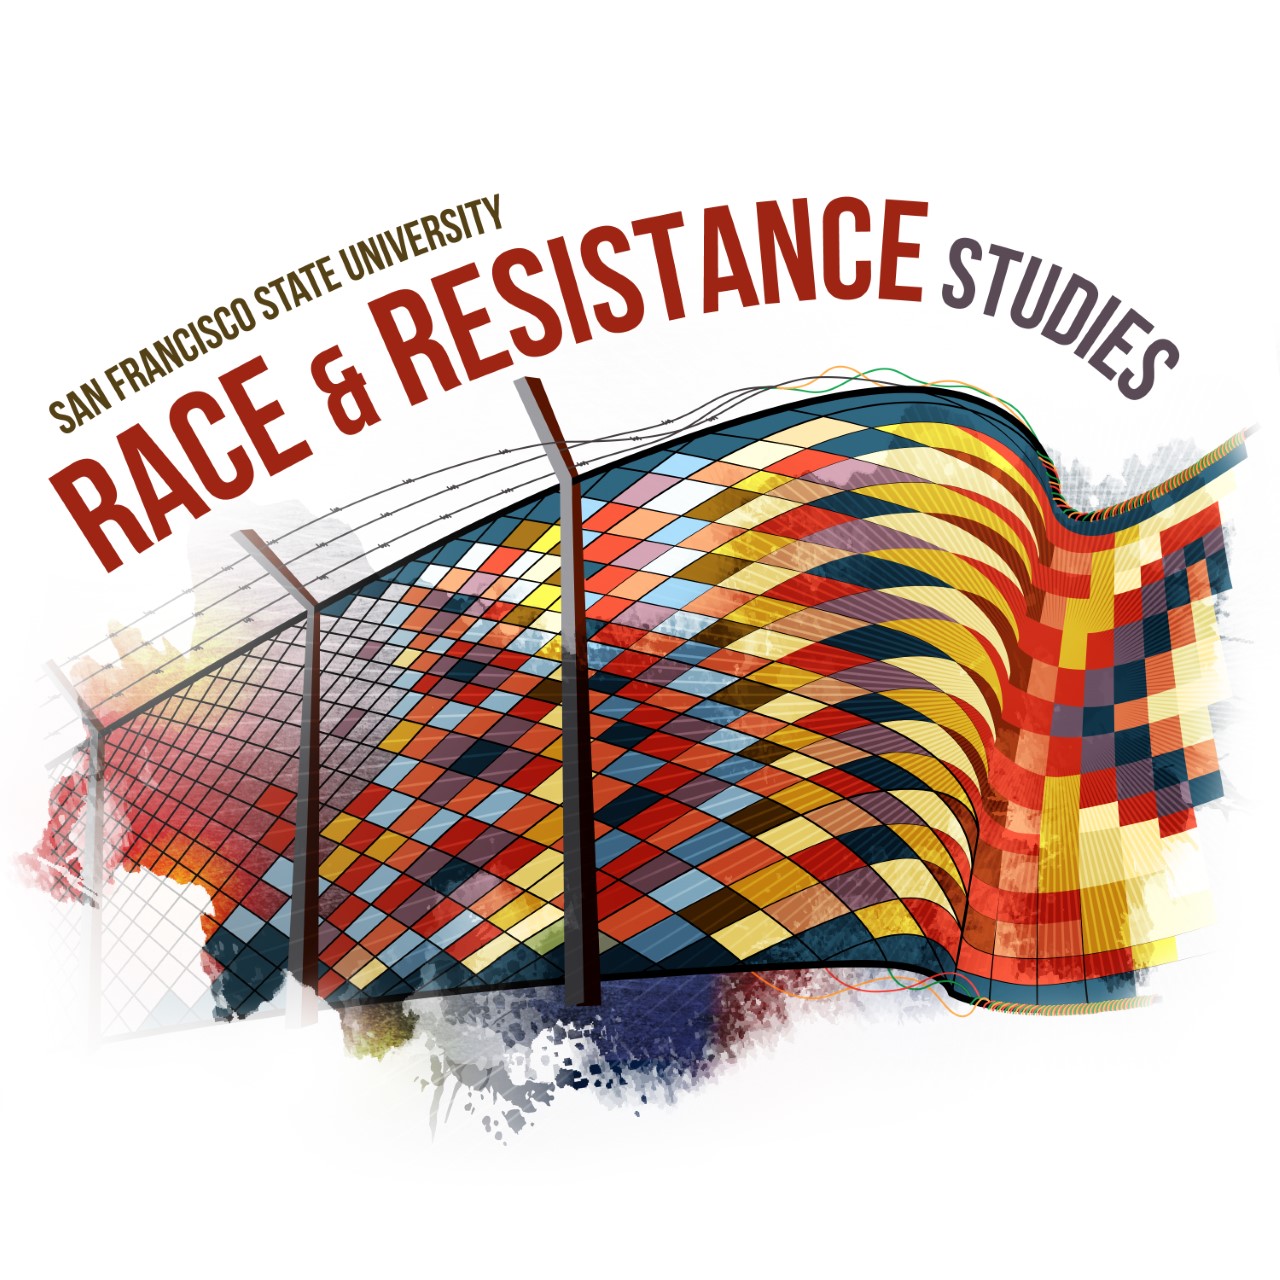 Race and Resistance Studies Logo and professors